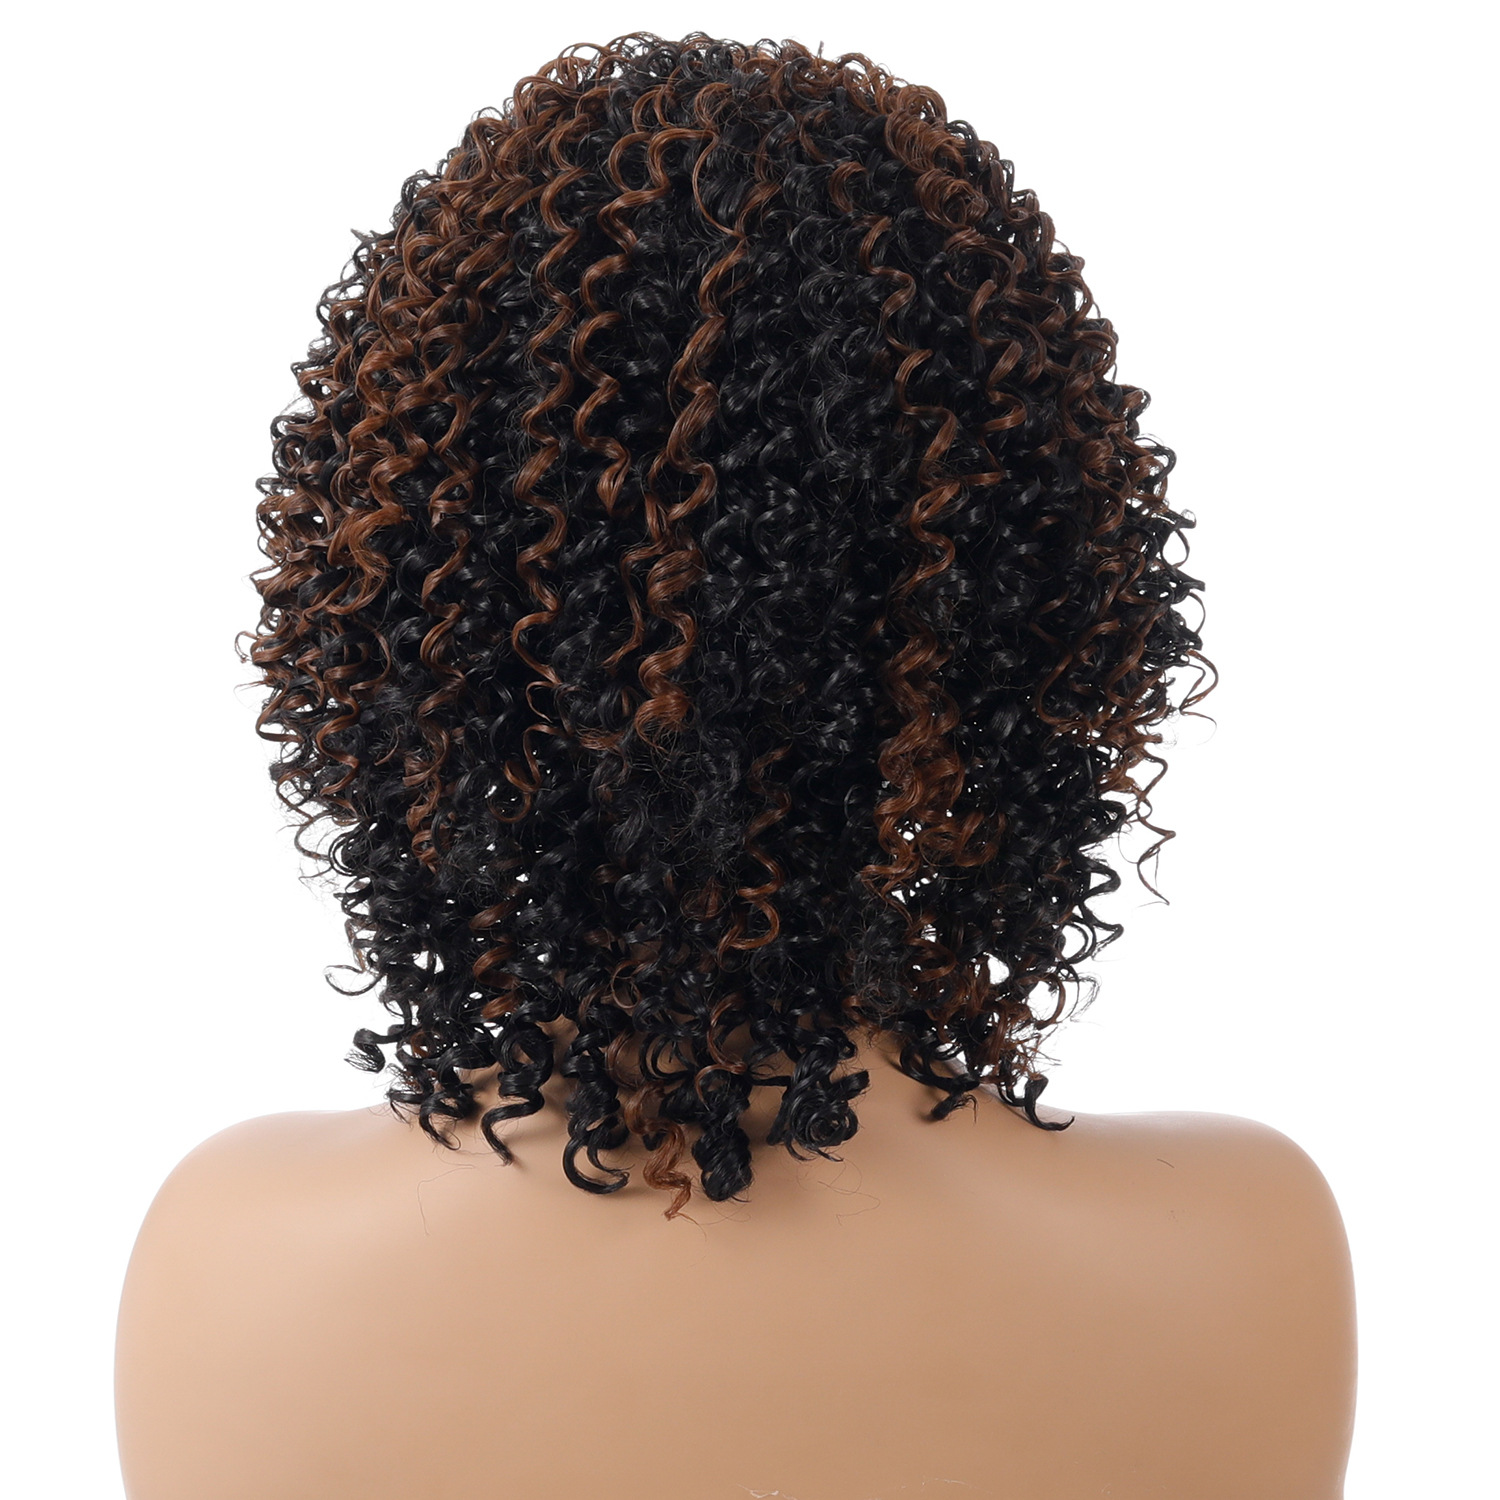 A wig with small curls that burst with a variety of bright colors.